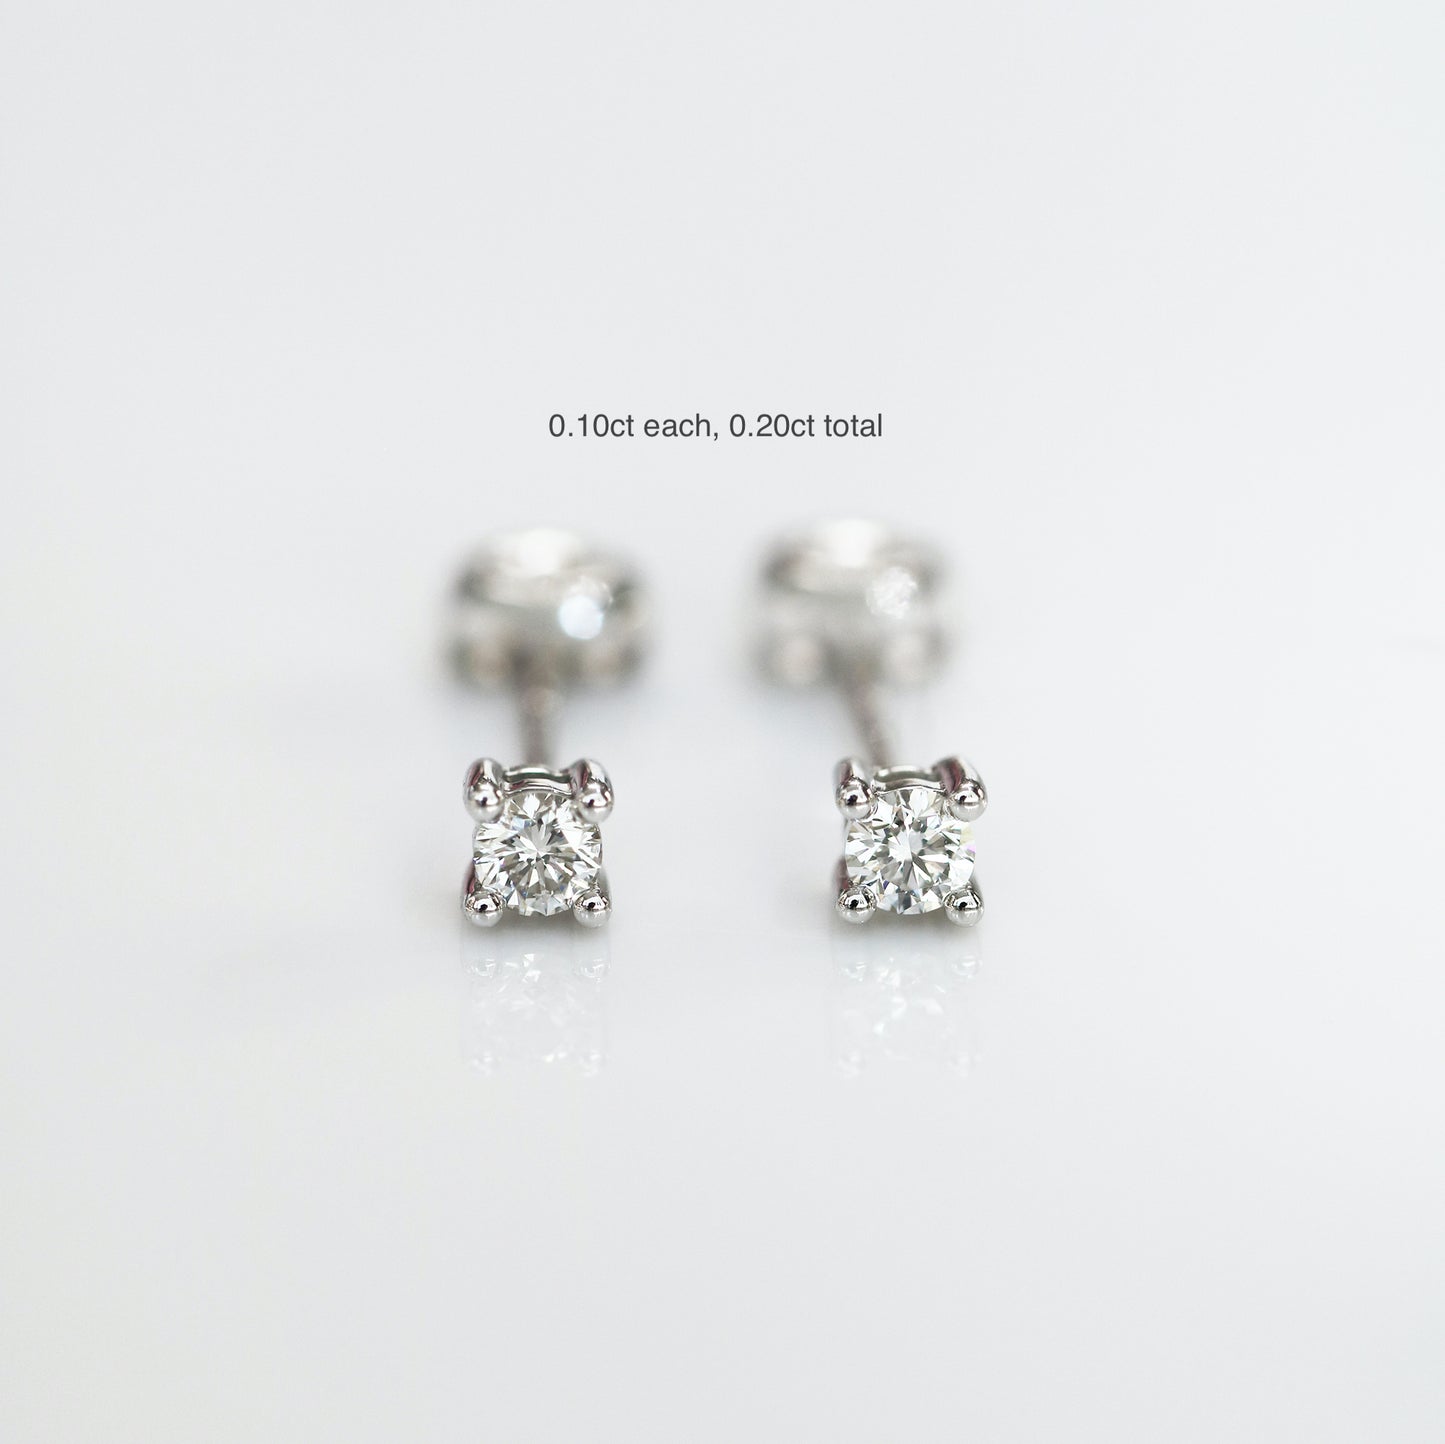 18k White Gold Classic 4-prong/6-prong Round Diamond Stud Earrings, Single or Pair